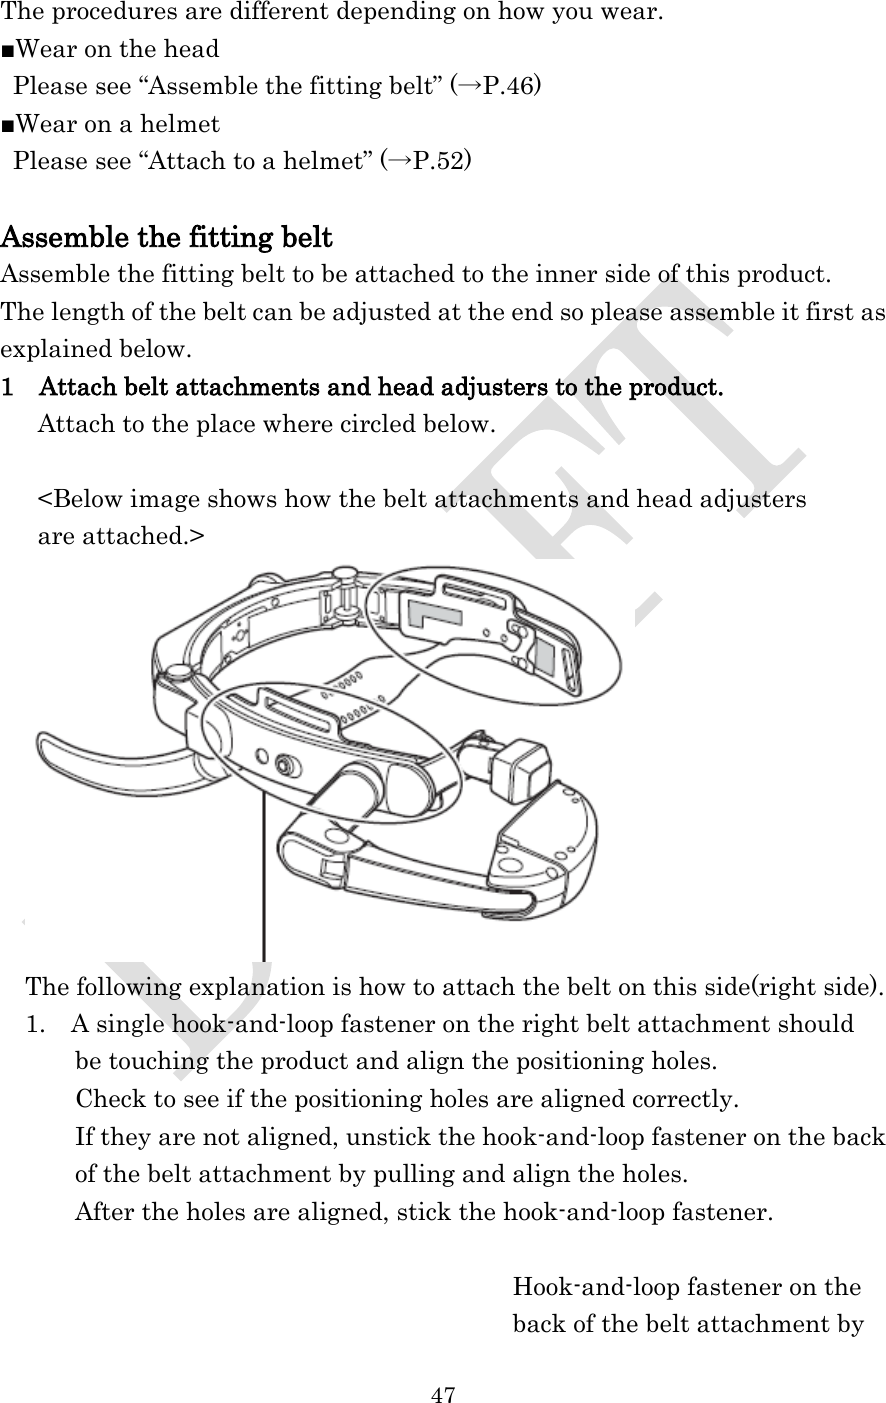  47  The procedures are different depending on how you wear. ■Wear on the head Please see “Assemble the fitting belt” (→P.46) ■Wear on a helmet Please see “Attach to a helmet” (→P.52)  Assemble the fitting belt Assemble the fitting belt to be attached to the inner side of this product. The length of the belt can be adjusted at the end so please assemble it first as explained below. 1  Attach belt attachments and head adjusters to the product.    Attach to the place where circled below.  &lt;Below image shows how the belt attachments and head adjusters   are attached.&gt;  The following explanation is how to attach the belt on this side(right side). 1.  A single hook-and-loop fastener on the right belt attachment should   be touching the product and align the positioning holes. Check to see if the positioning holes are aligned correctly. If they are not aligned, unstick the hook-and-loop fastener on the back of the belt attachment by pulling and align the holes. After the holes are aligned, stick the hook-and-loop fastener.                                         Hook-and-loop fastener on the   back of the belt attachment by 